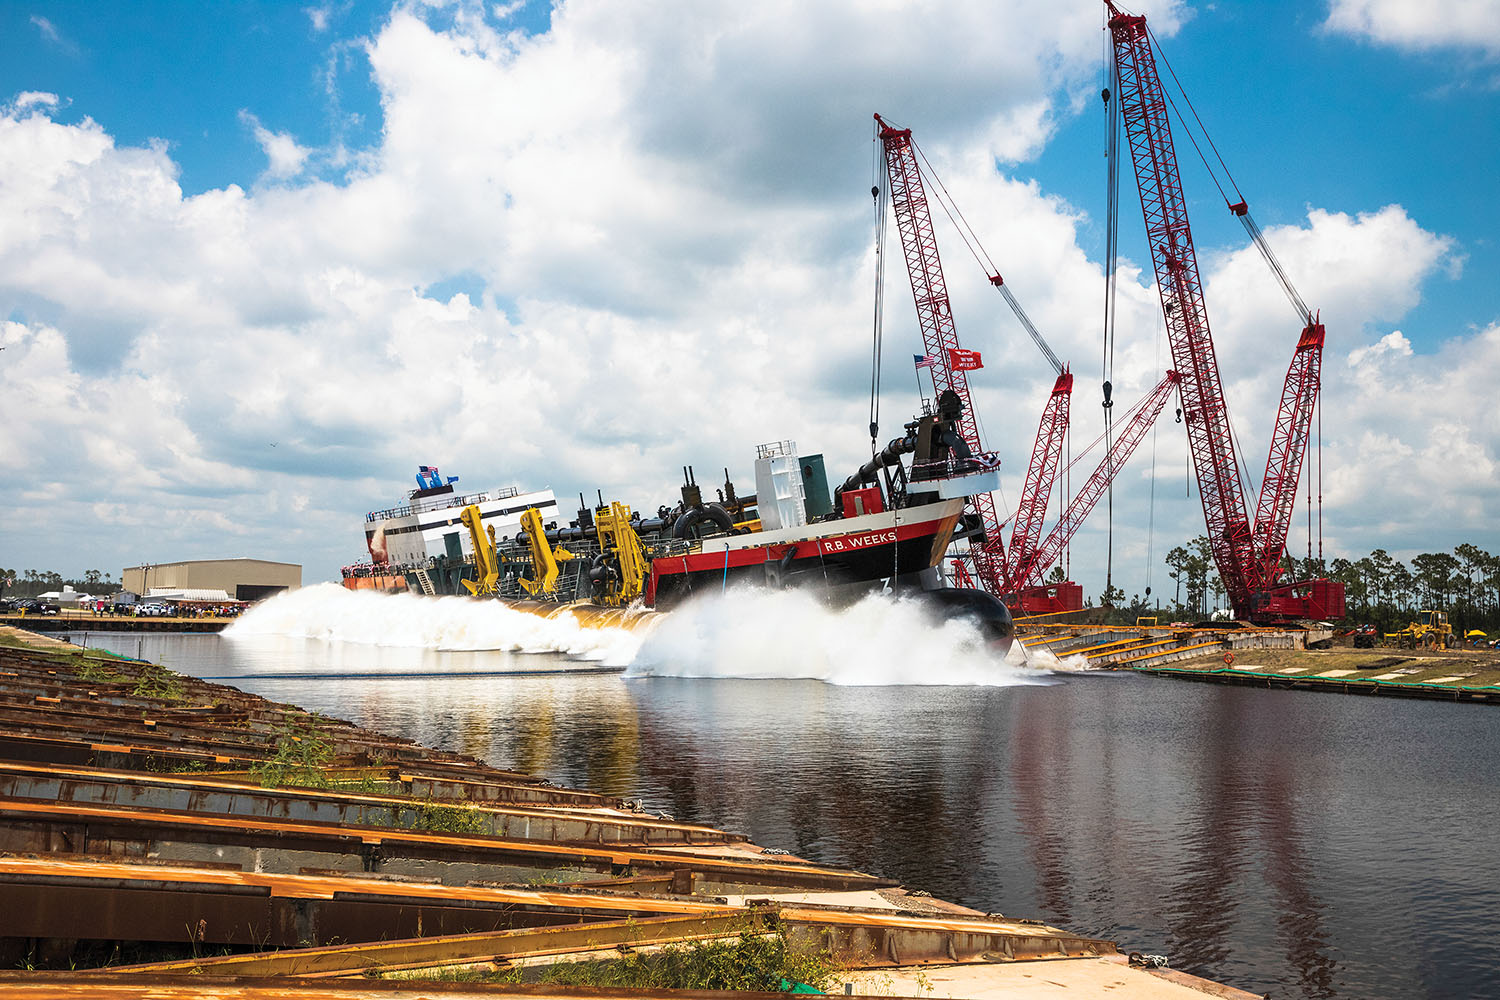 The trailing suction hopper dredge R.B. Weeks hits the water at Eastern Shipbuilding Group’s Allanton Shipyard. (Photo courtesy of Eastern Shipbuilding)